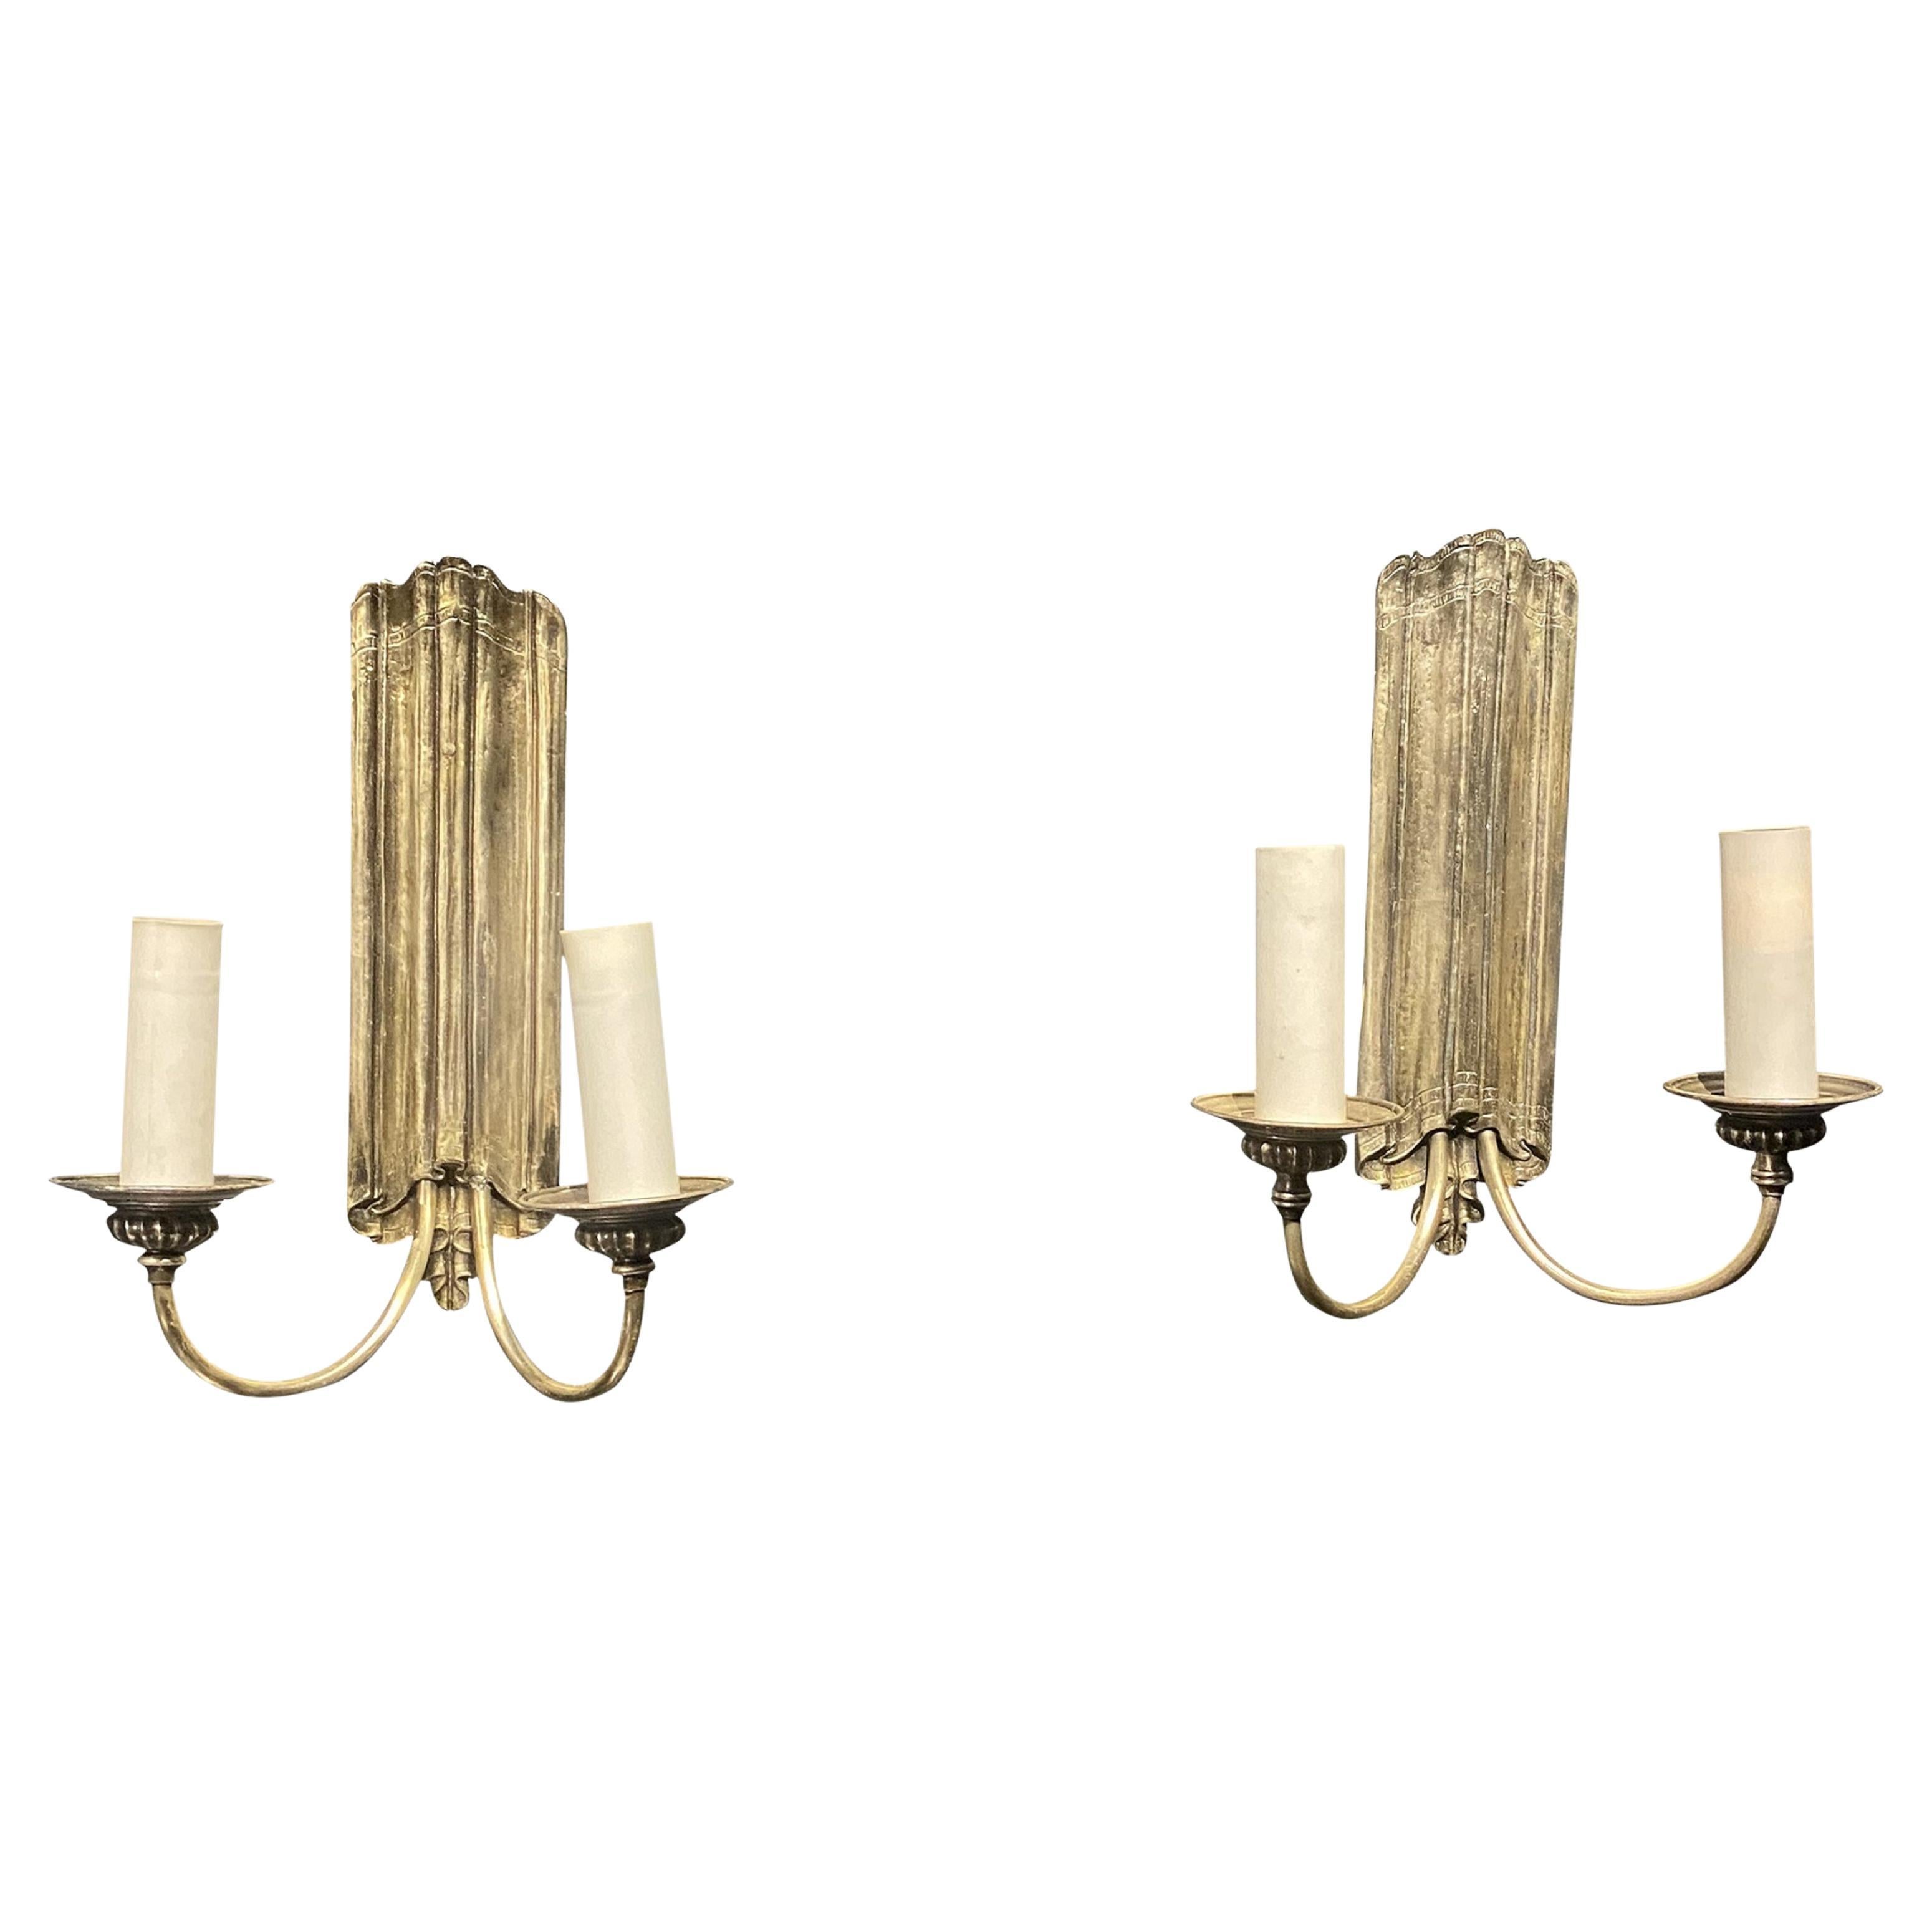 Pair of Silver Plated Caldwell Sconces, Circa 1920s